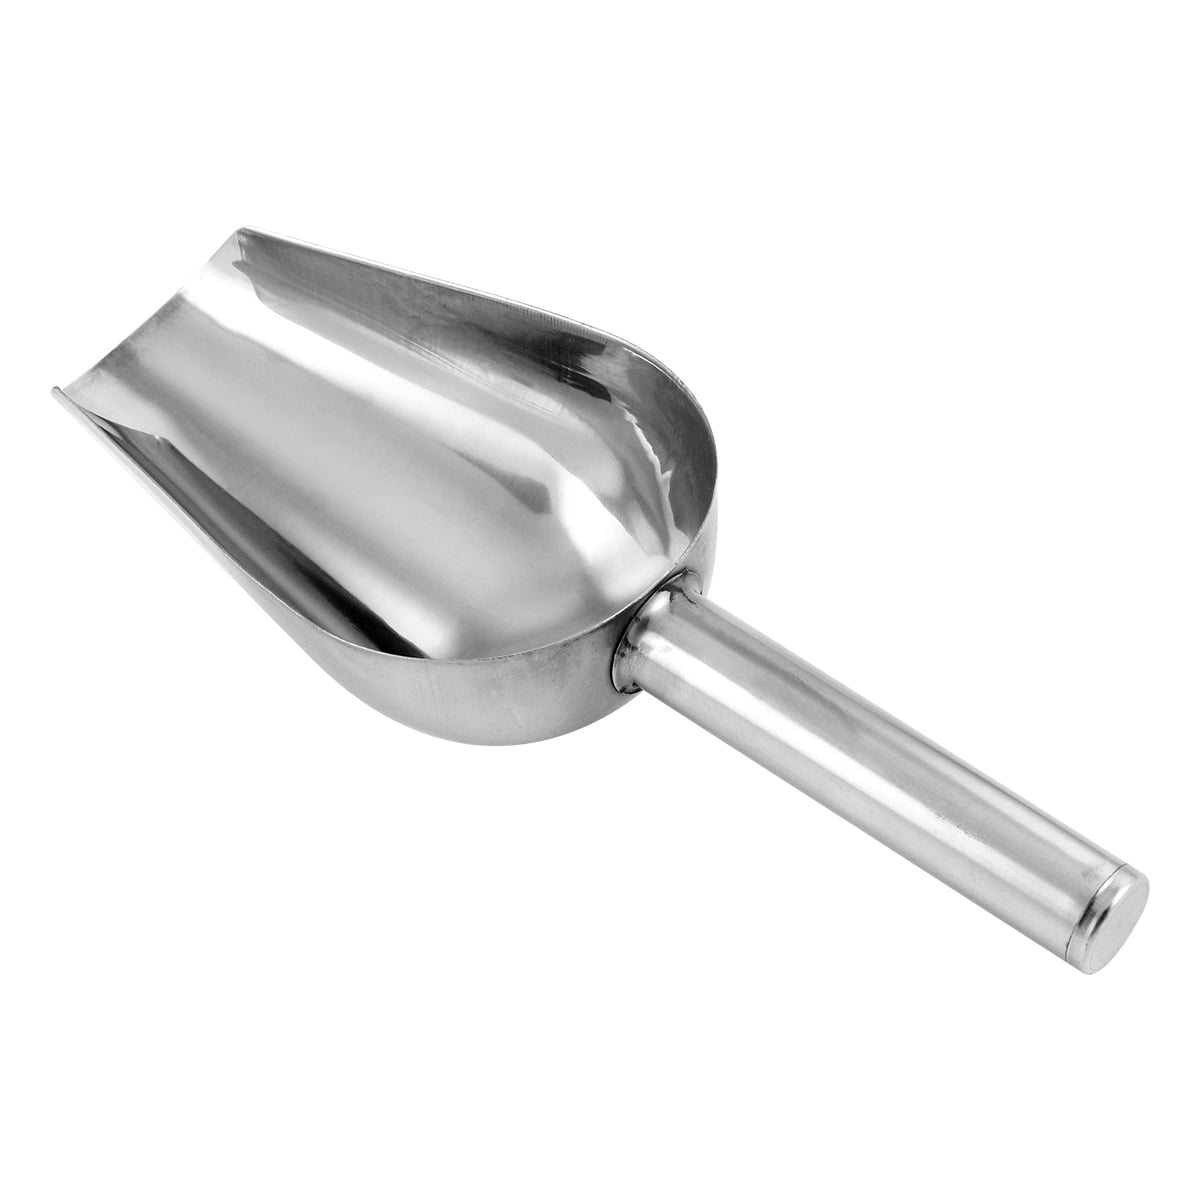 Stainless Steel Ice Scoop,Small Metal Scoops for Kitchen Bar Party  Wedding,Heavy Duty Dishwasher Safe,8 Ounces 